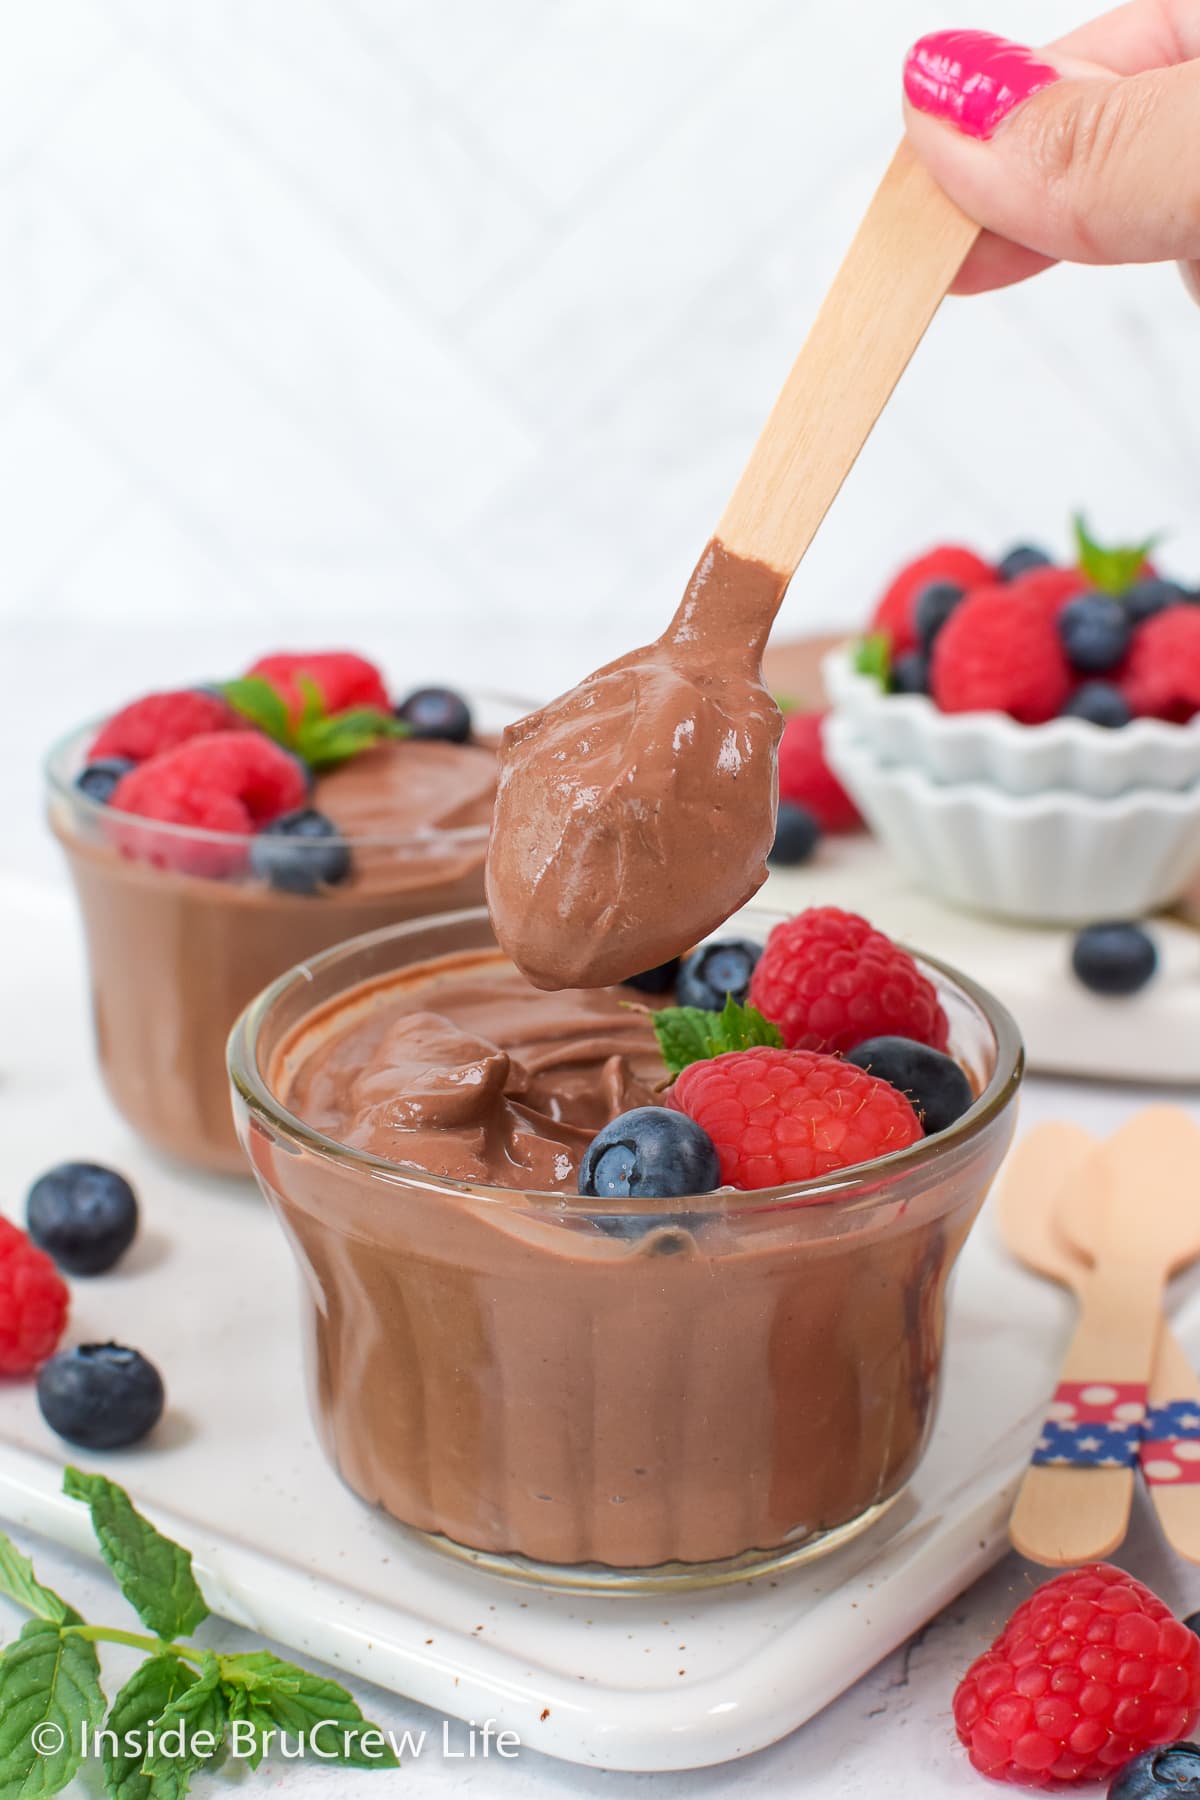 A bowl of chocolate pudding with a spoon.